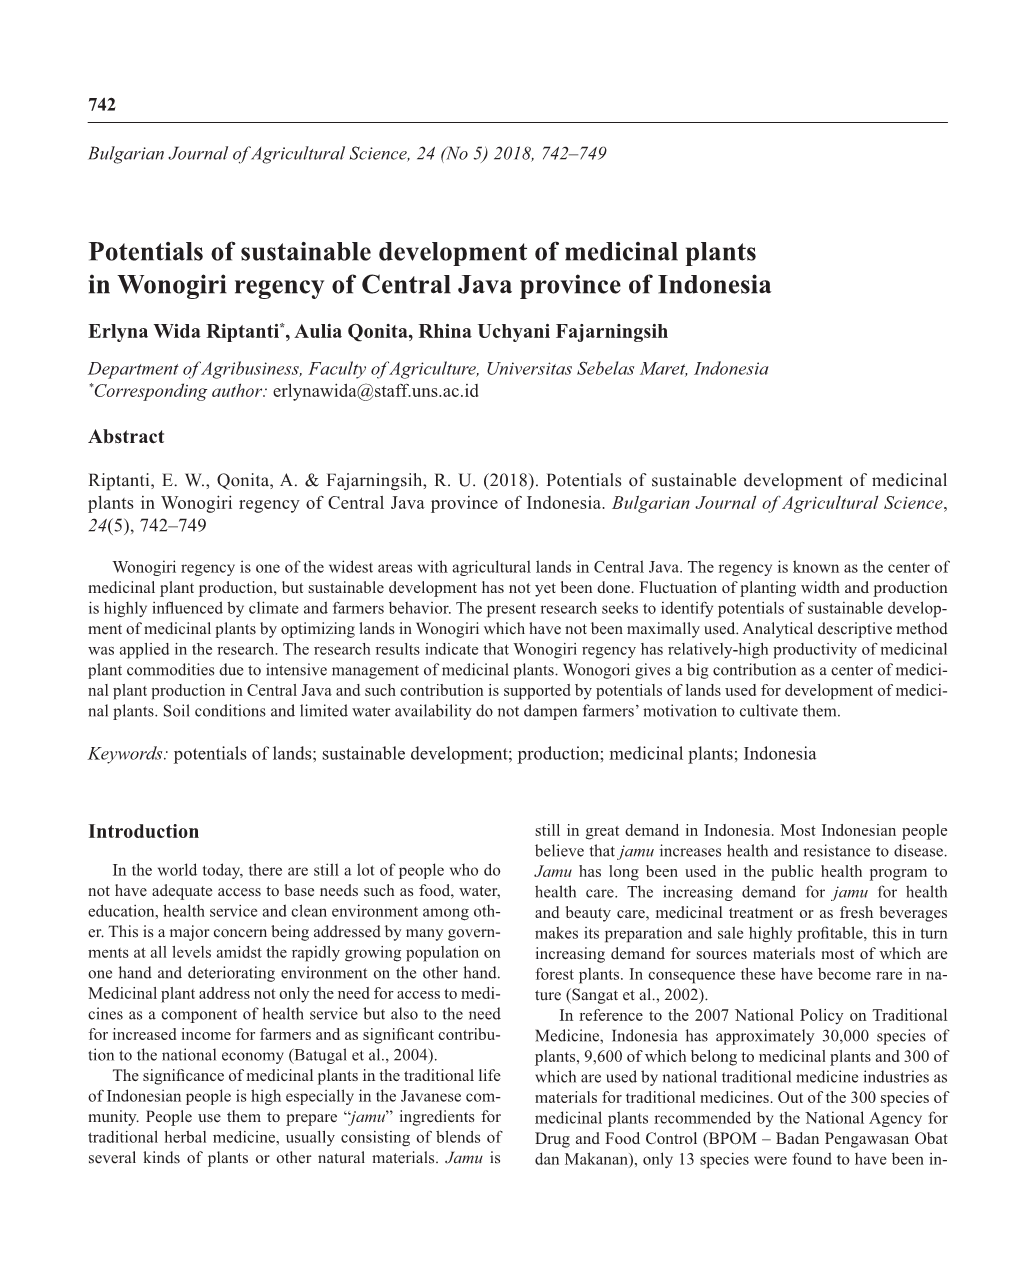 Potentials of Sustainable Development of Medicinal Plants in Wonogiri Regency of Central Java Province of Indonesia